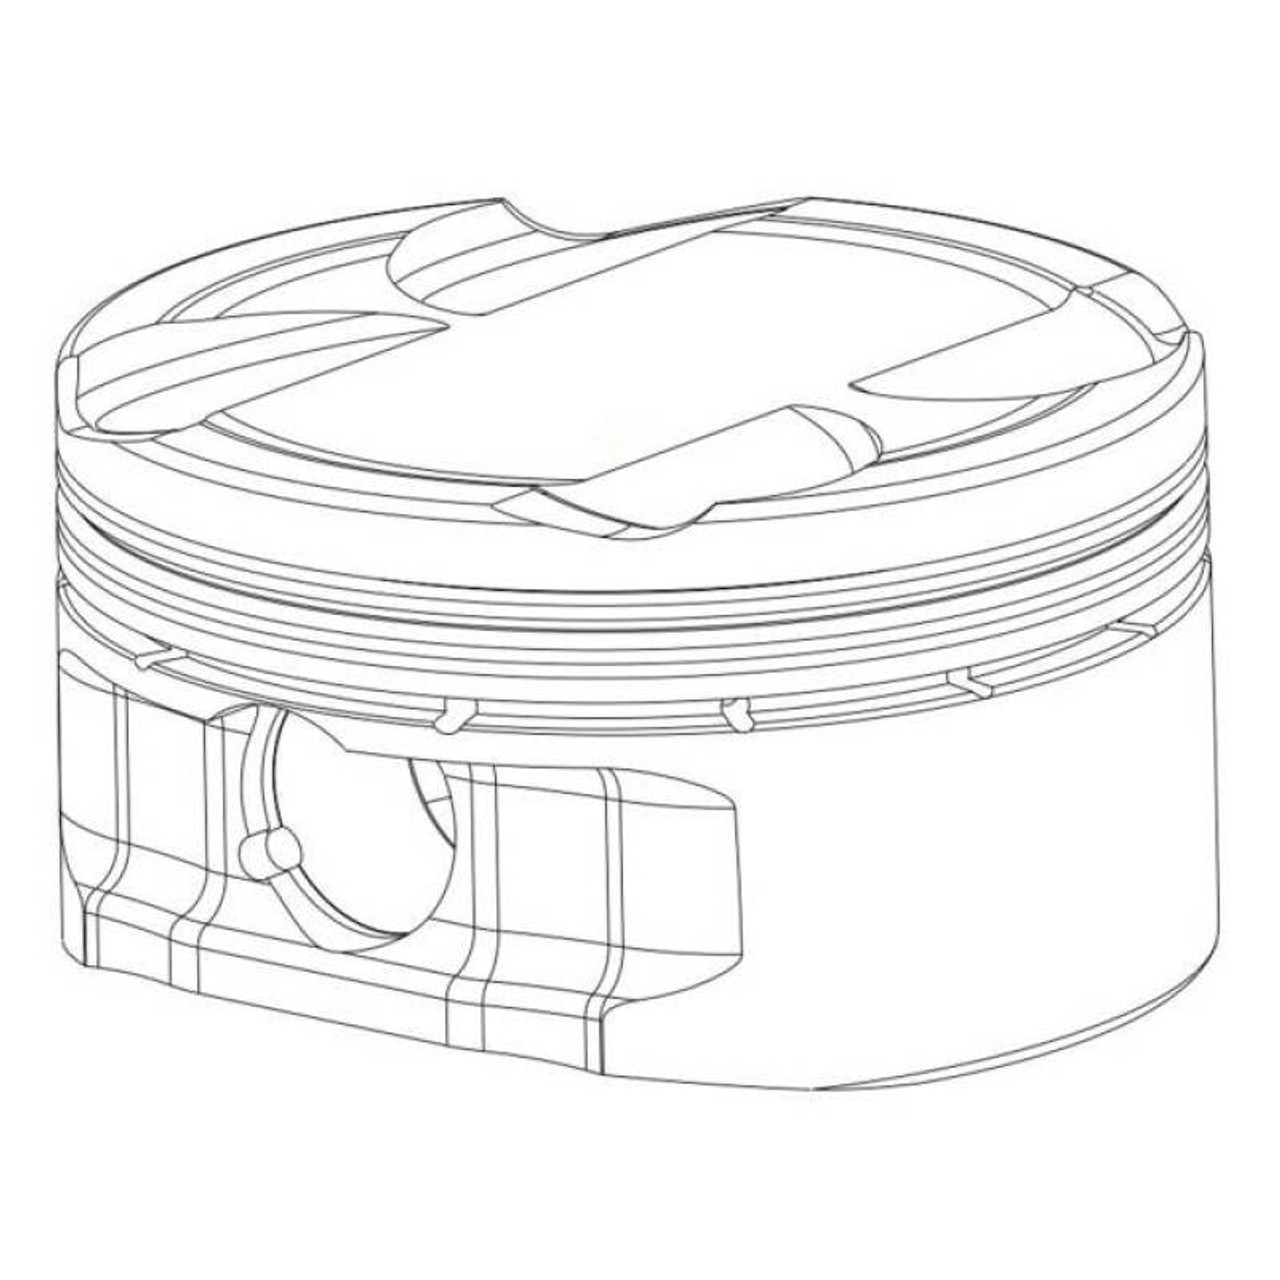 CP Piston & Ring for Nissan CA18DET - Bore (83.5mm) - Size (+0.5mm) - CR (8.5) - SINGLE - SC7346-1 Photo - Primary